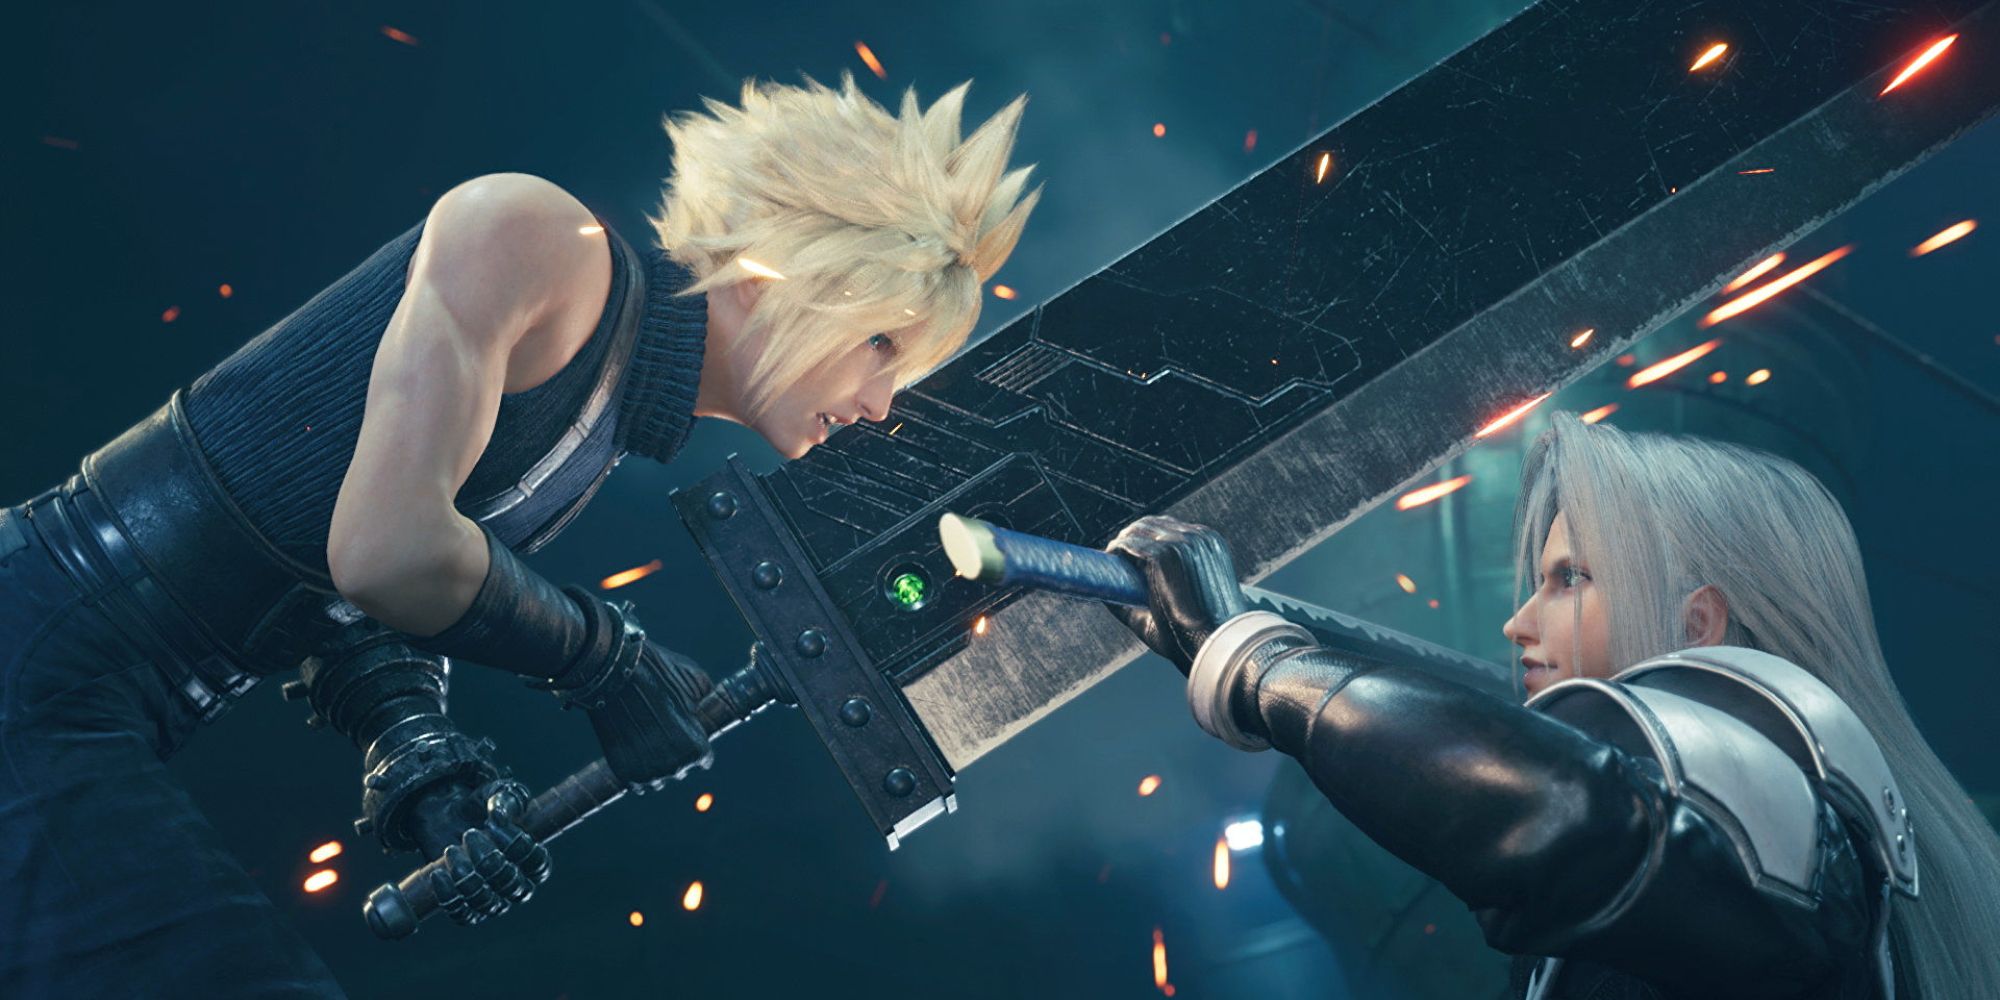 JRPG Battle Themes a mid shot of Cloud and Sephiroth from Final Fantasy 7 fighting with their swords clashing in the middle of the frame